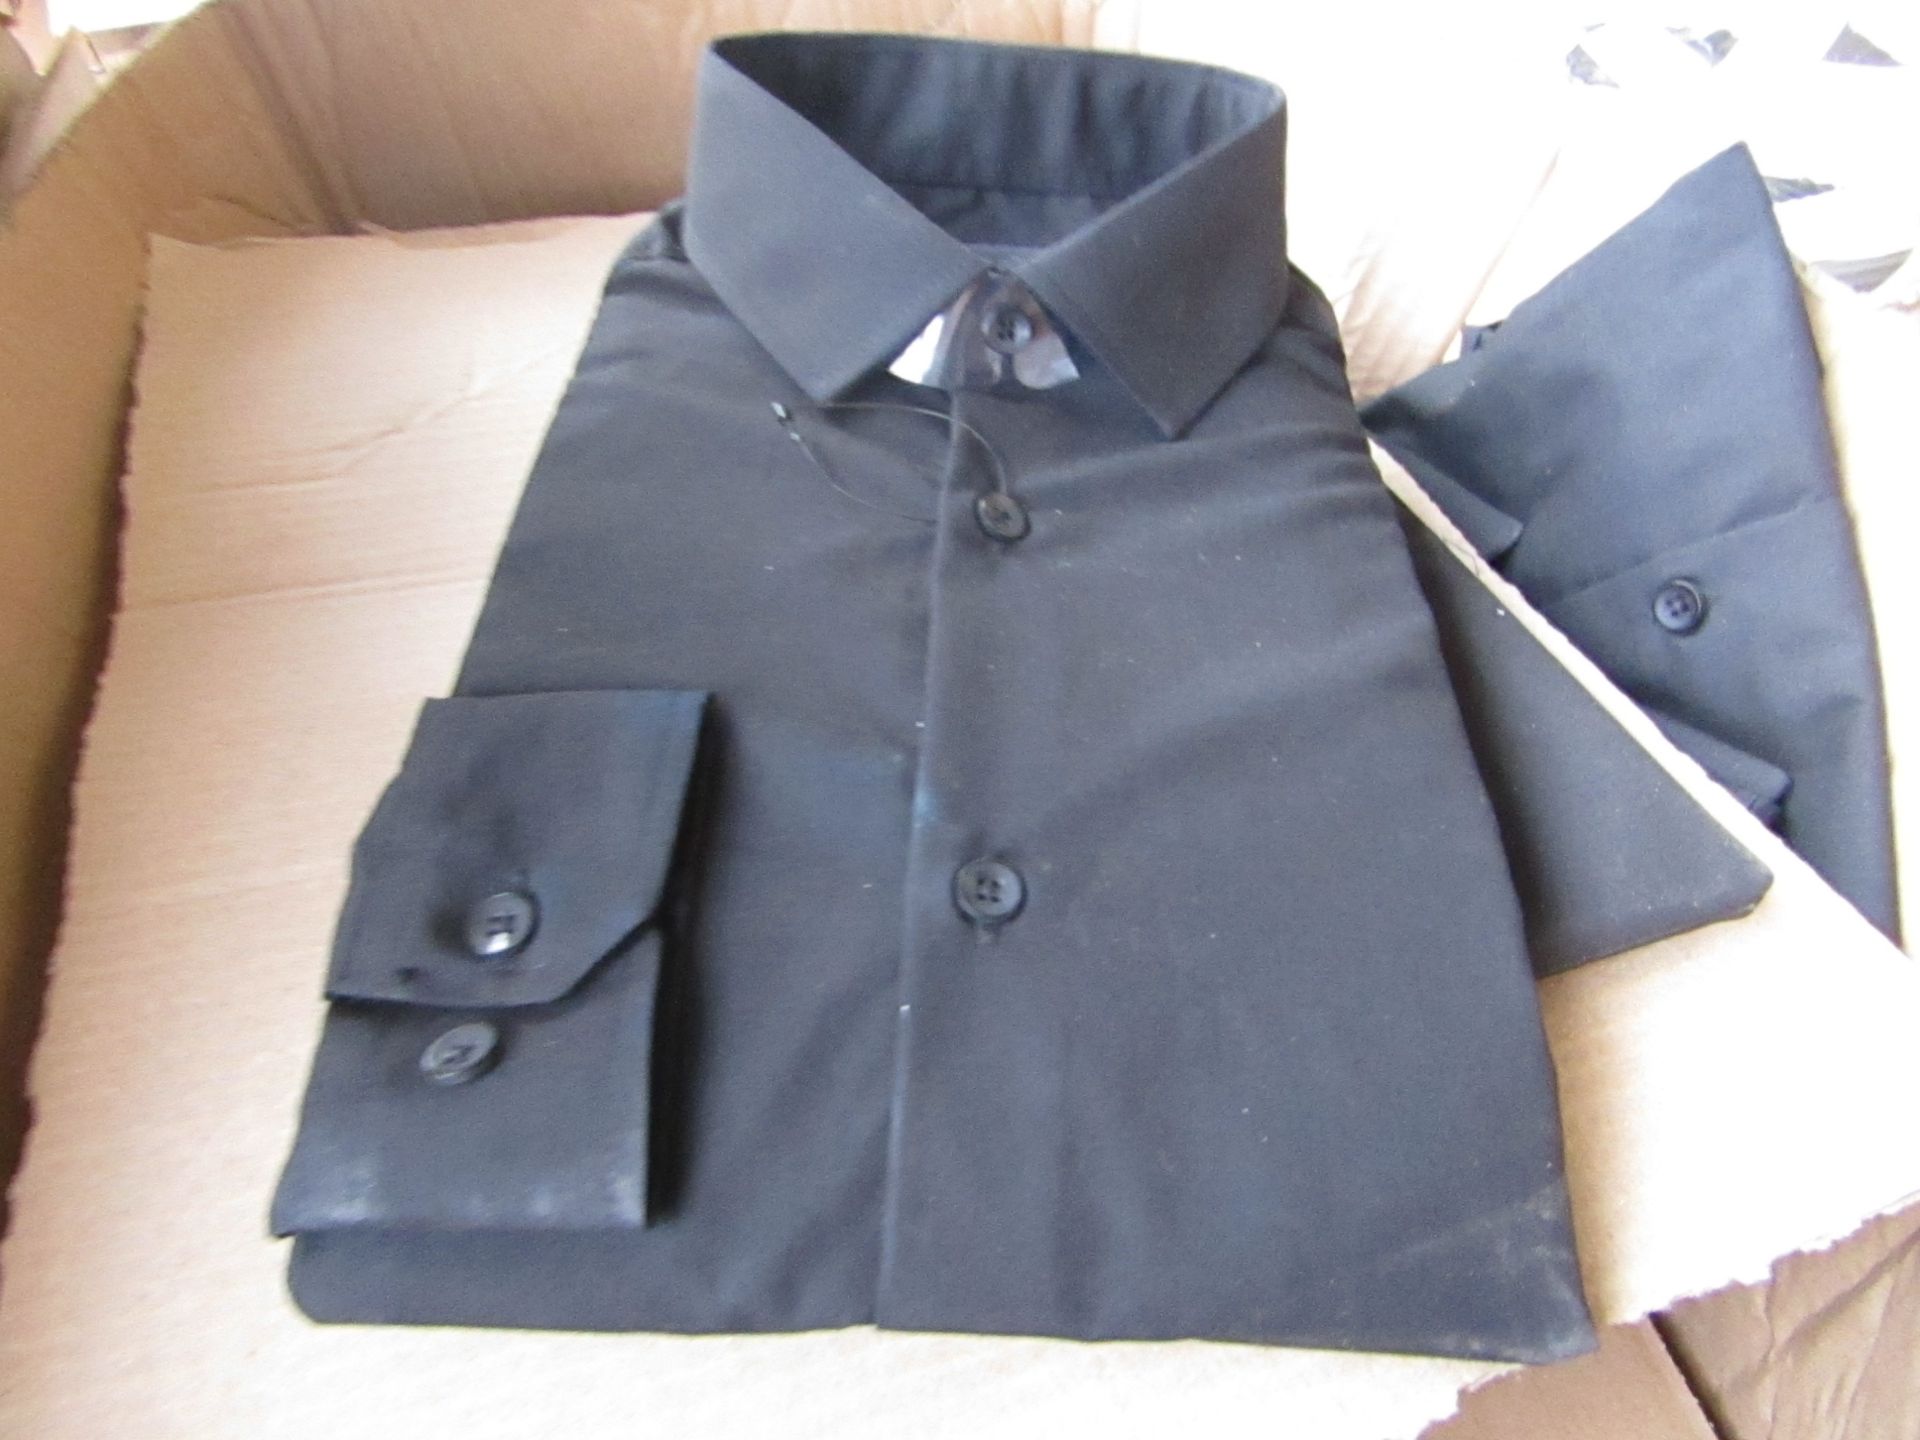 5x Primark formal shirts, size S, slim fit, new.